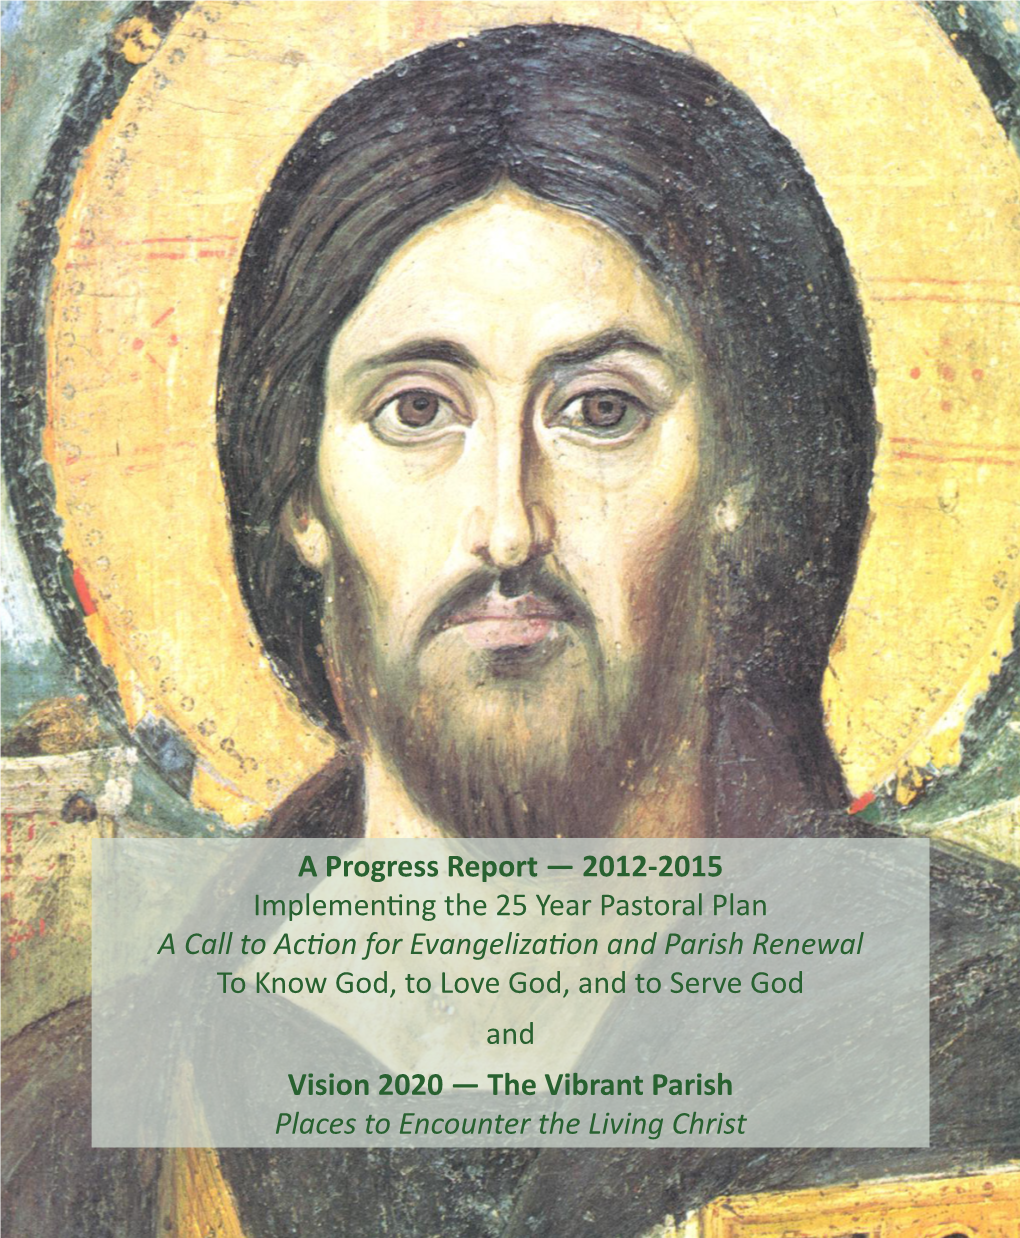 A Progress Report — 2012-2015 Implementing the 25 Year Pastoral Plan a Call to Acfion for Evangelizafion and Parish Renewal To